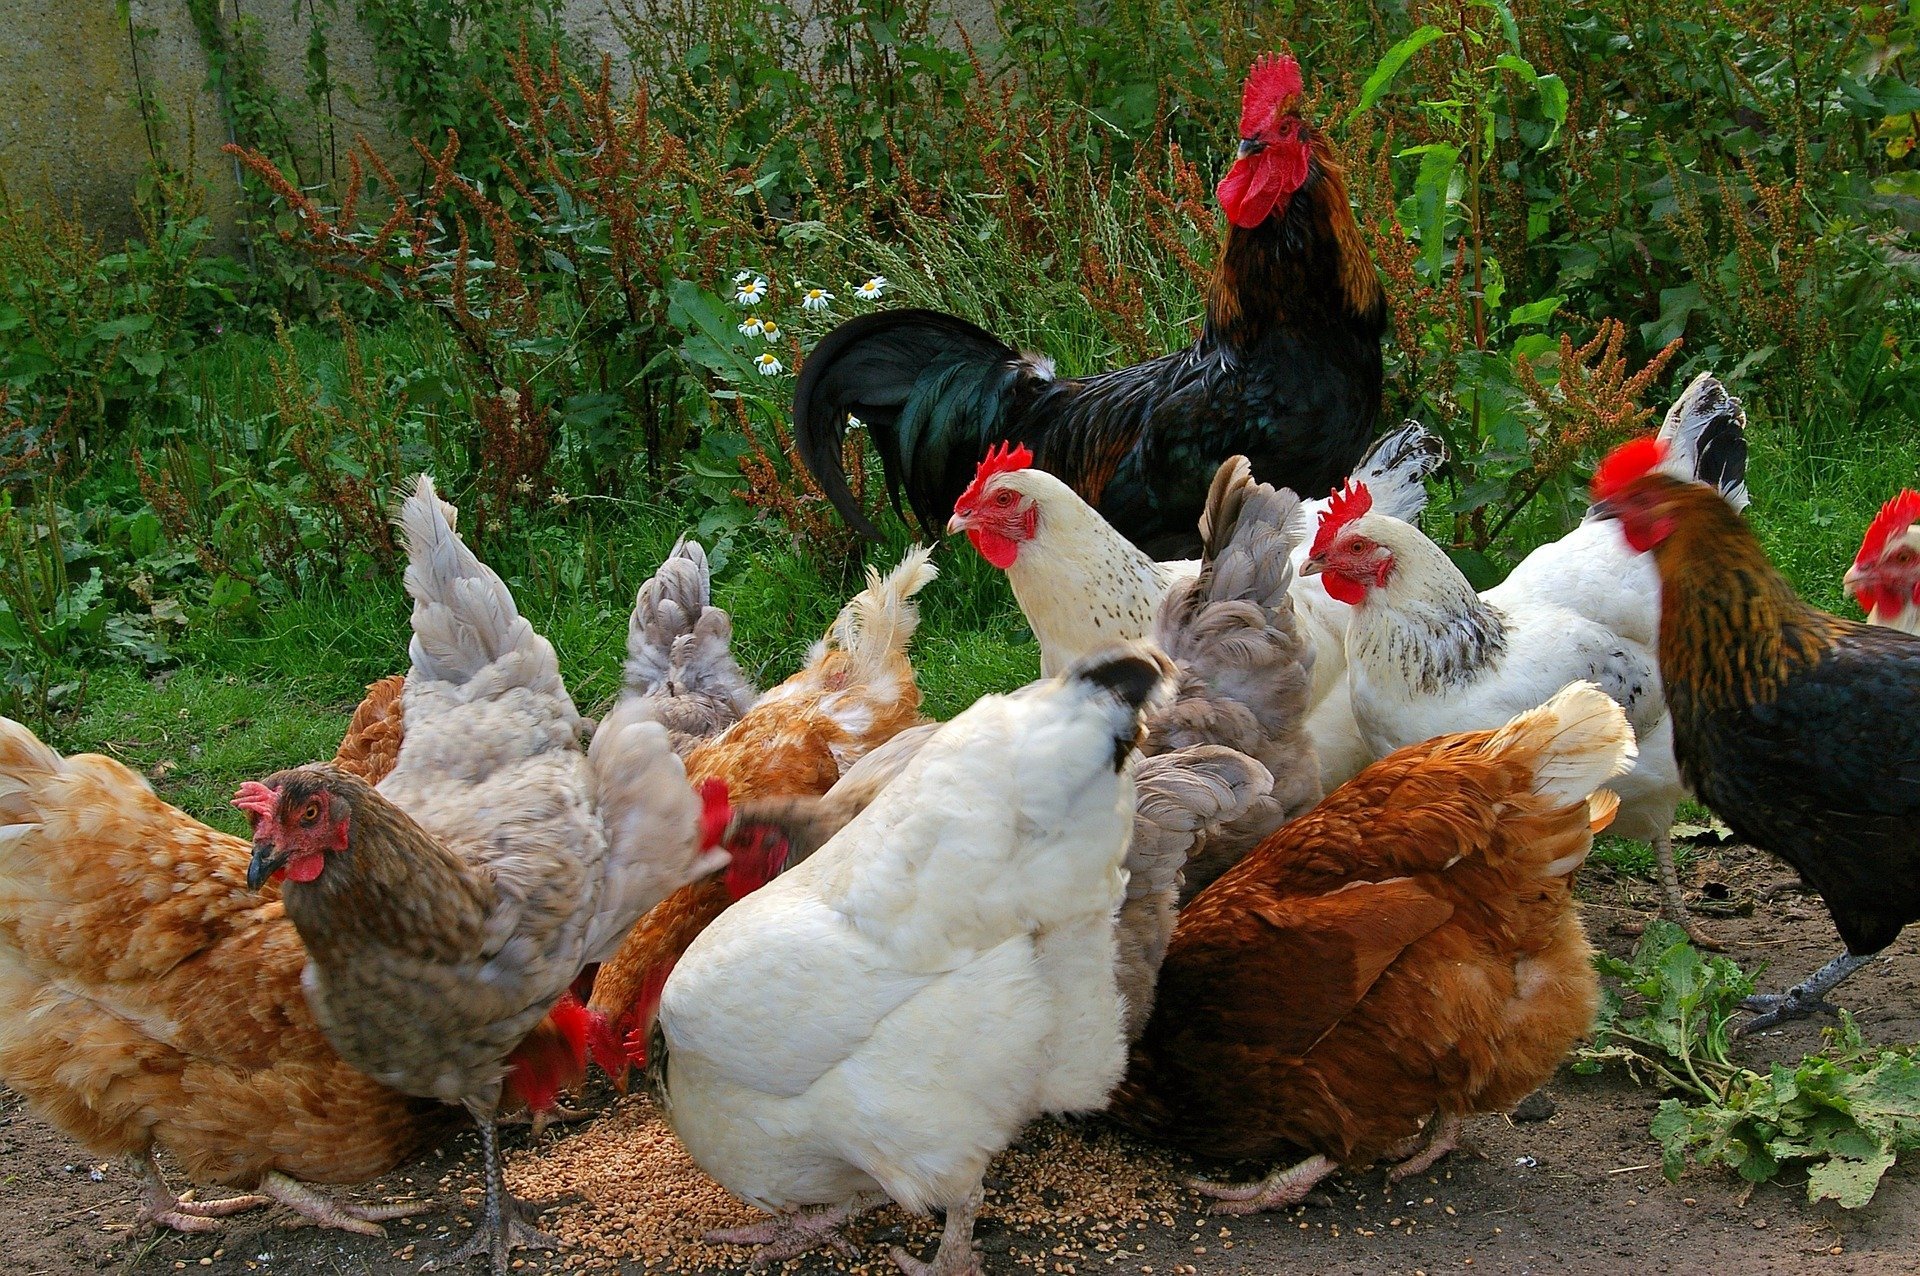 https://www.permaculturenews.org/wp-content/uploads/2019/06/chickens-874507_1920.jpg